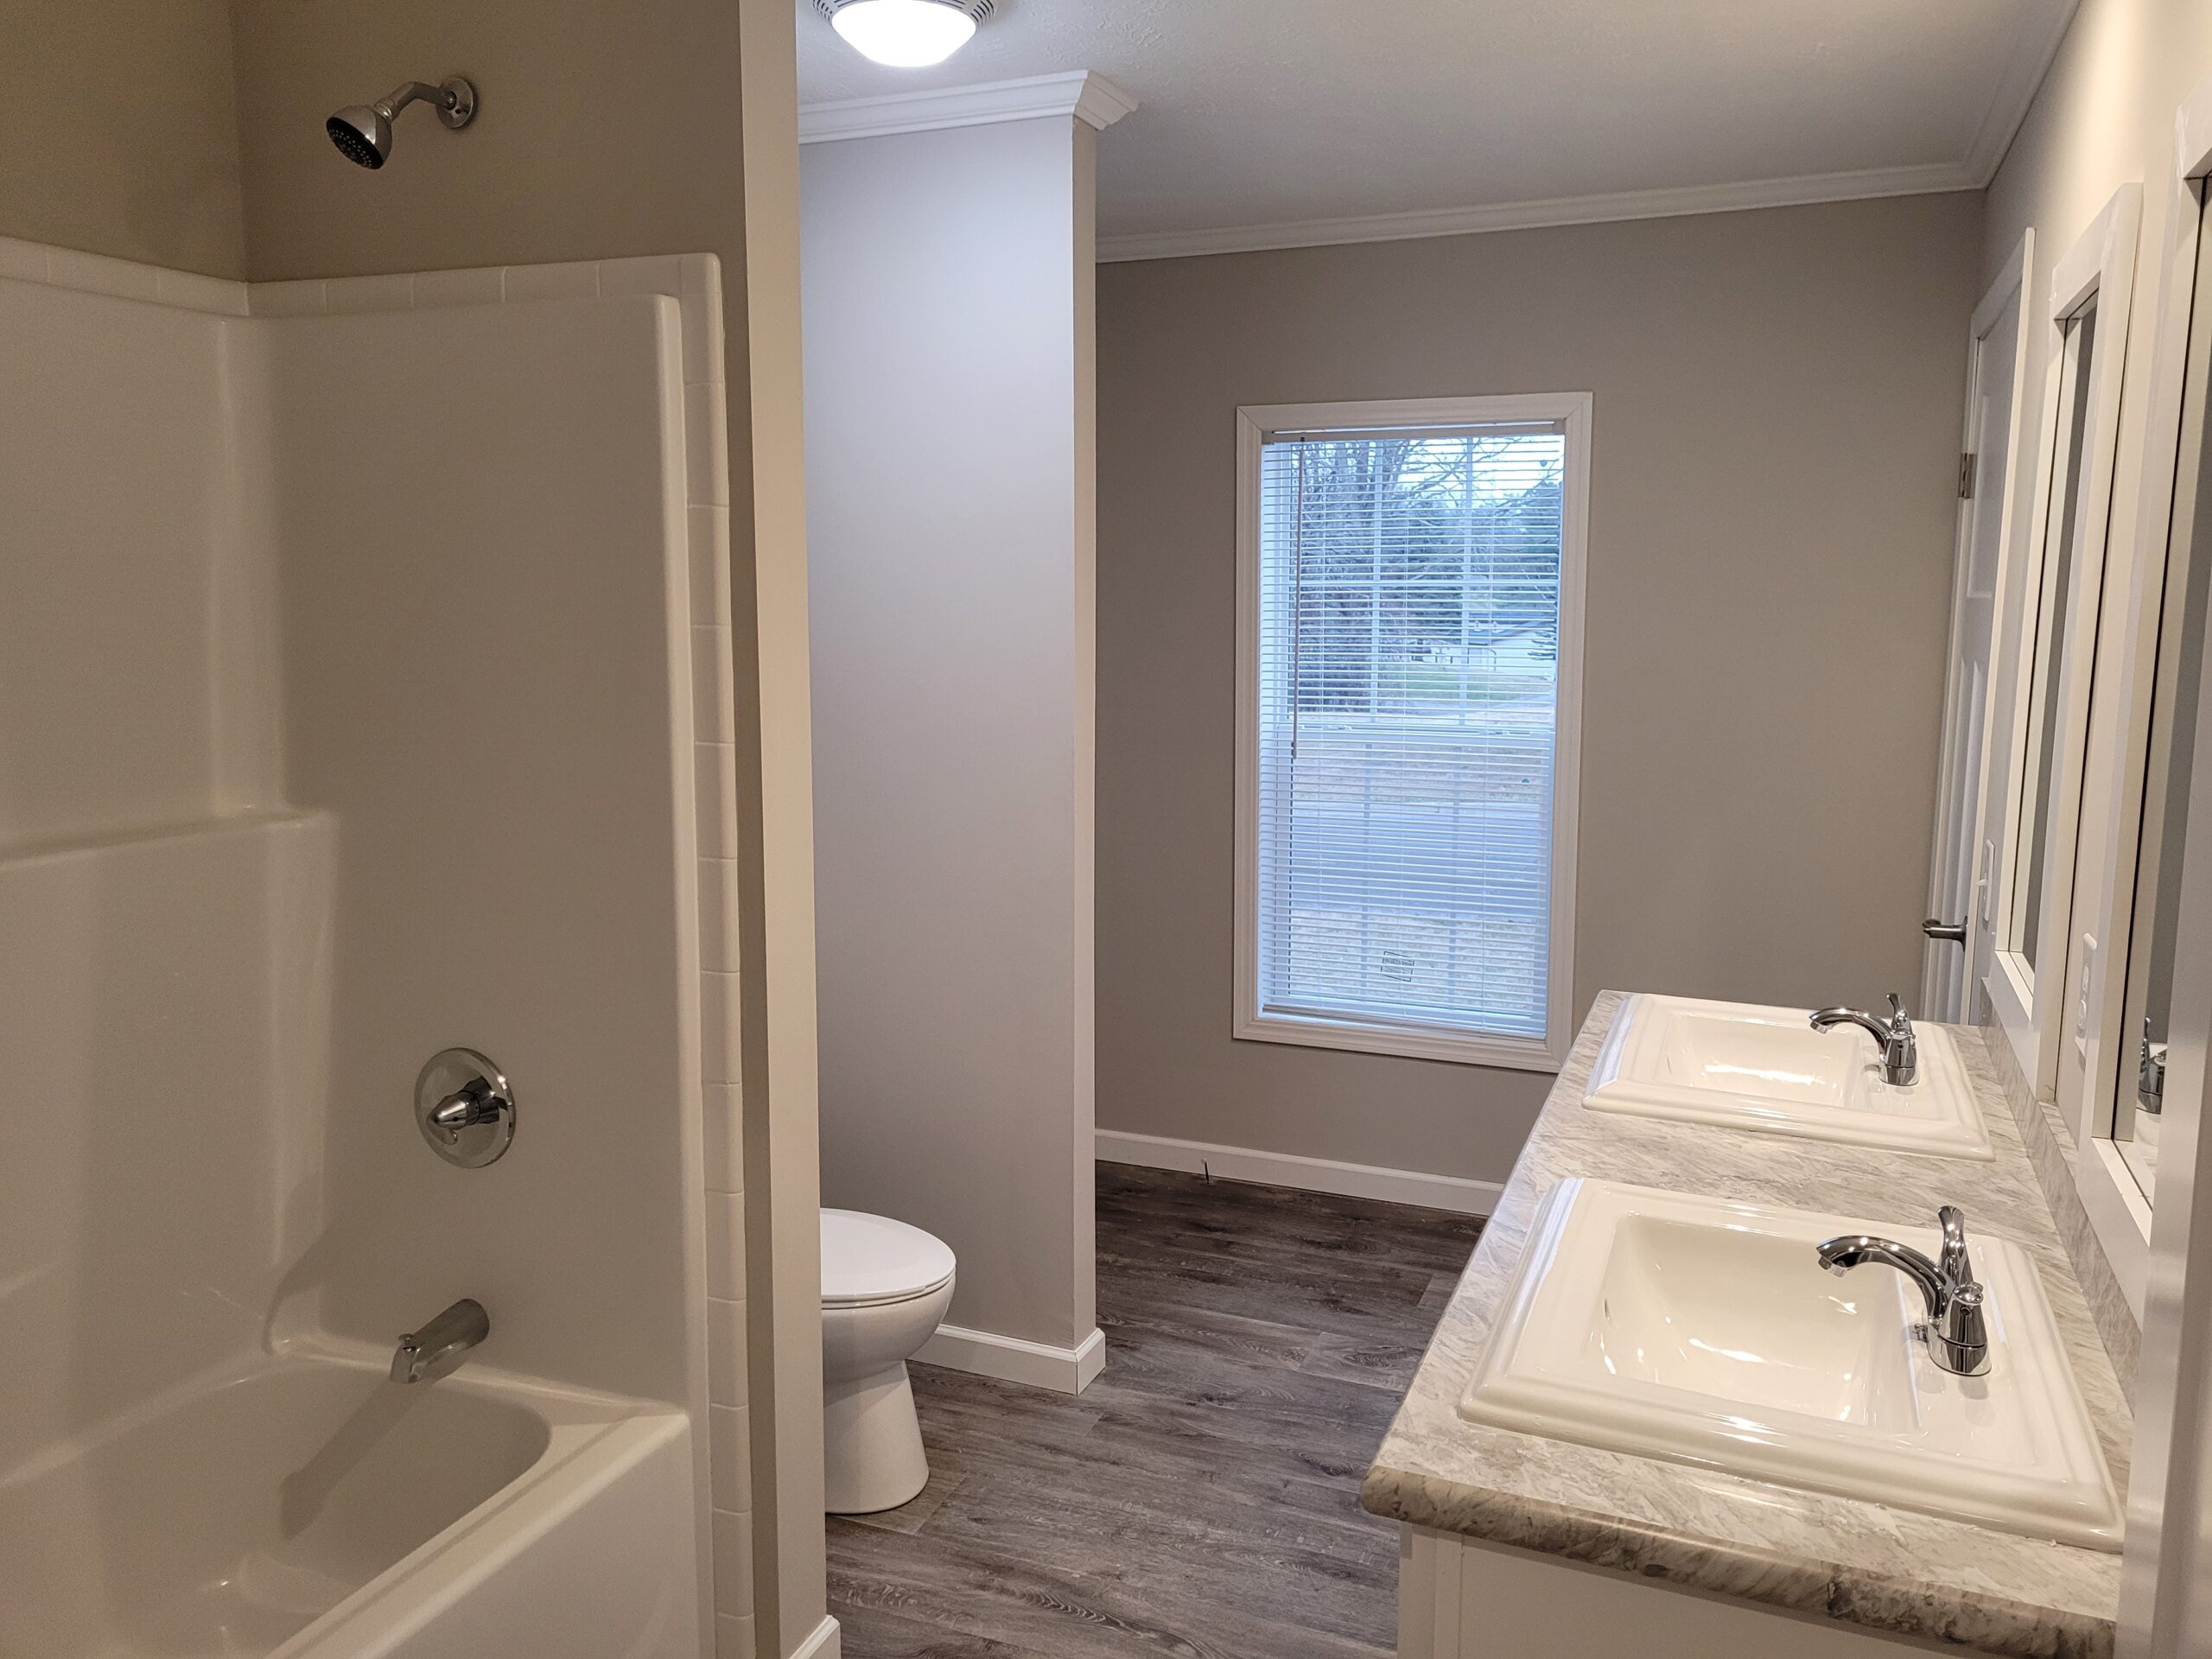 NEW HOME – NEW AMENITIES